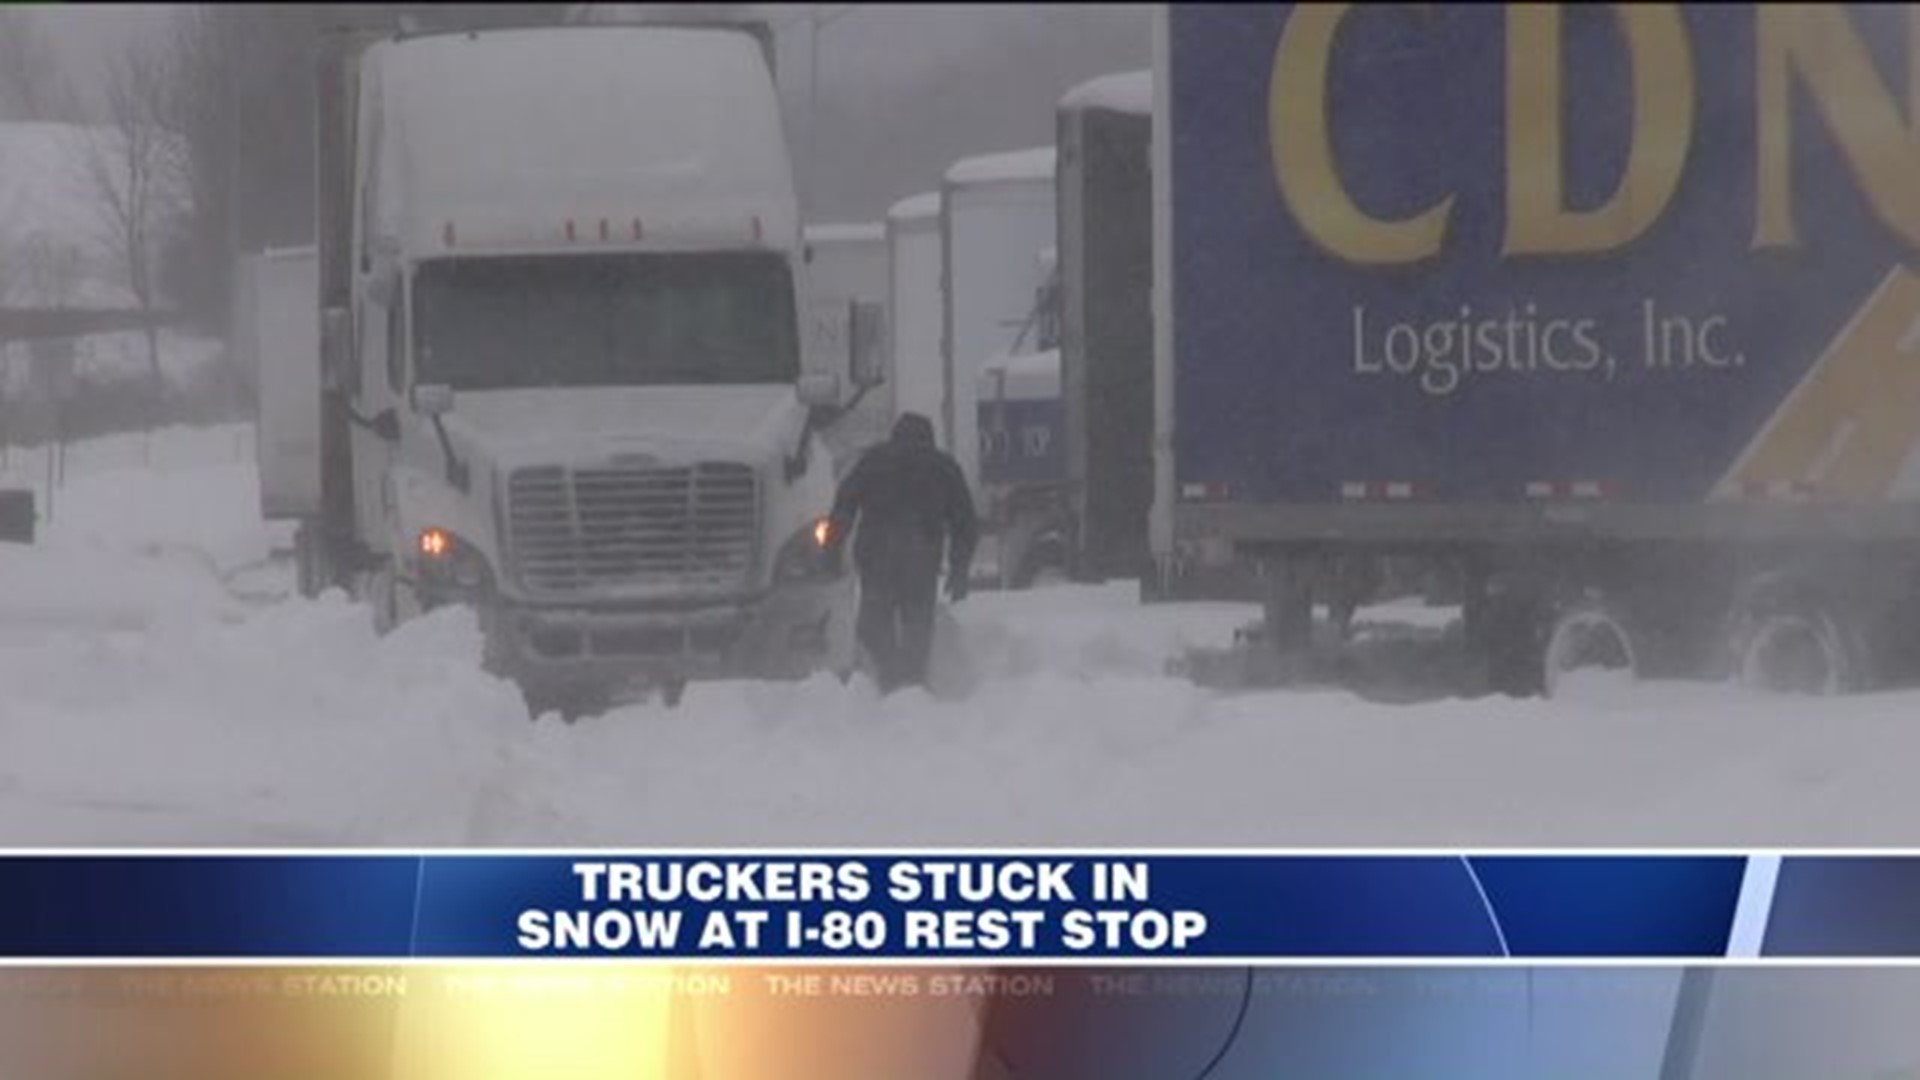 Truckers Stuck in Snow at Rest Stop